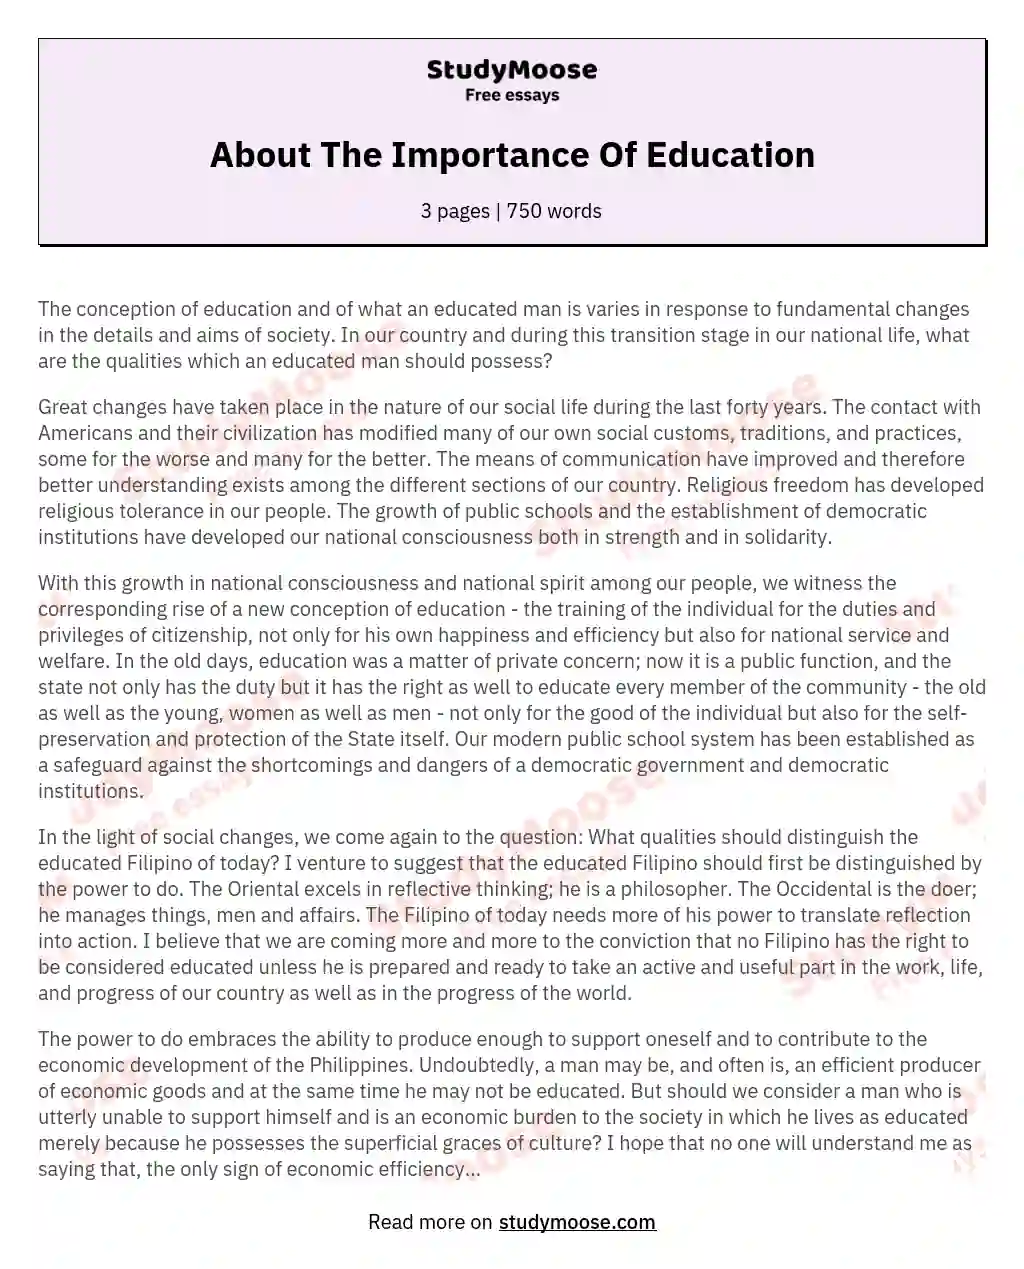 what is the importance of education essay 1000 words